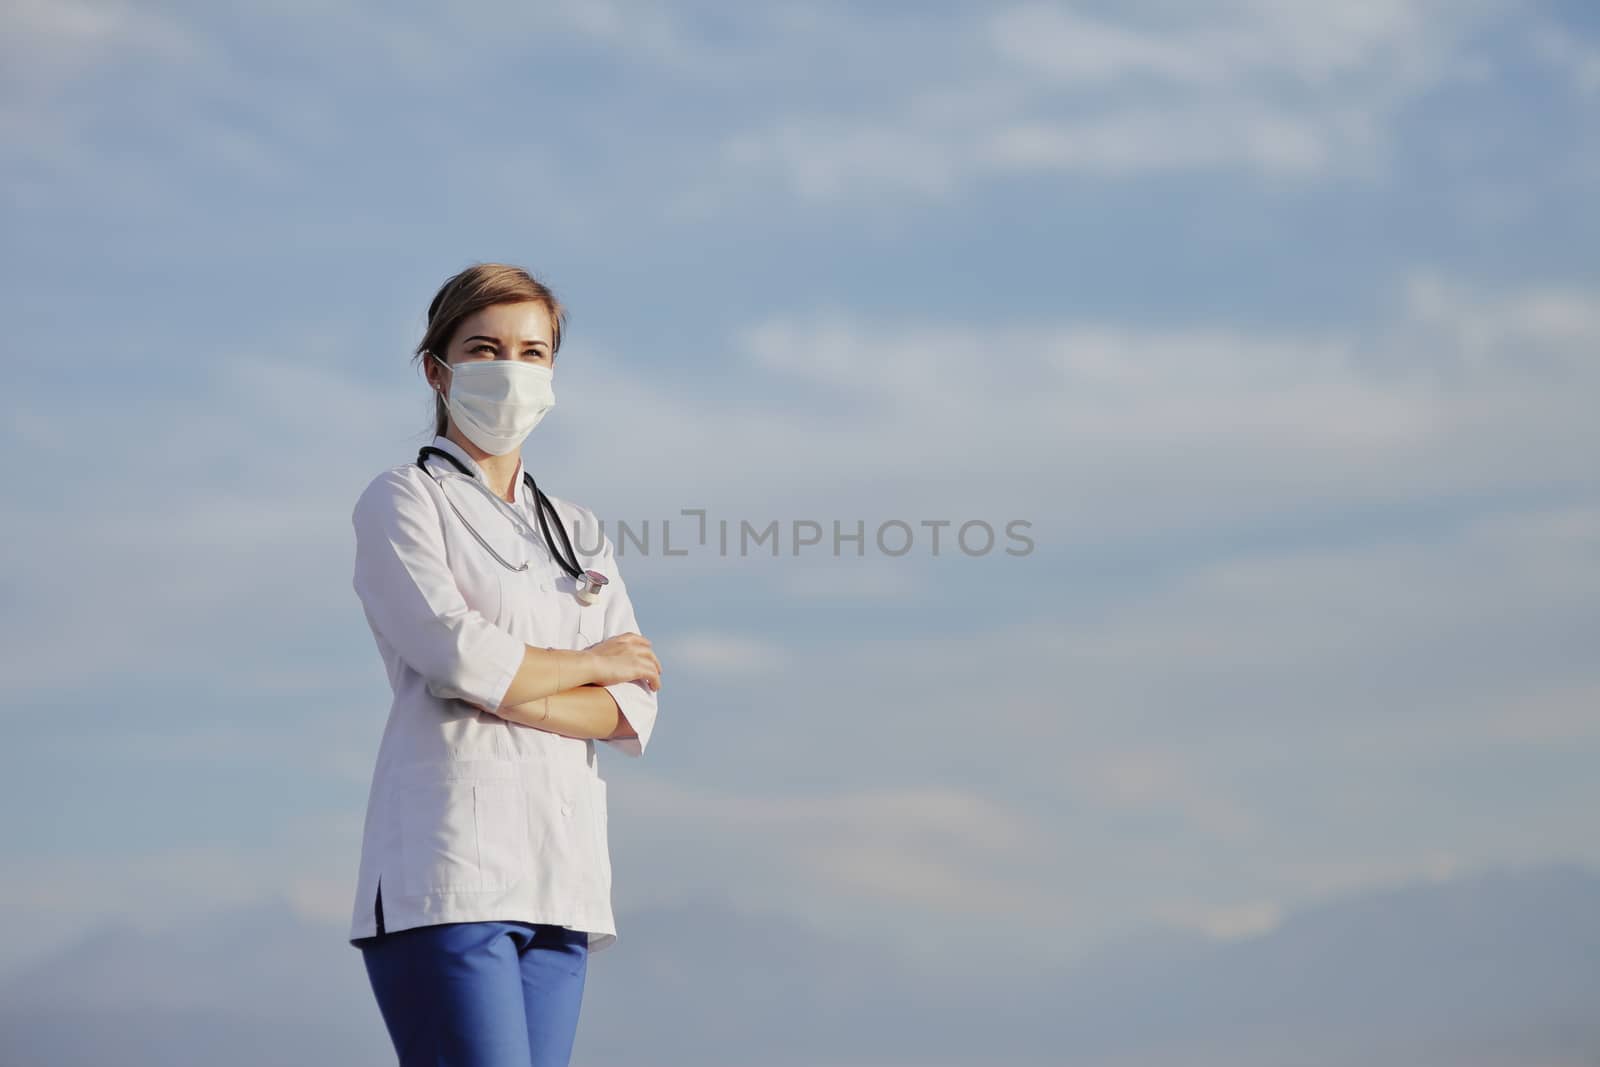 Female doctor, a nurse wearing a protective face mask against blue sky with clouds. Safety measures against the coronavirus. Prevention Covid-19 healthcare concept. Stethoscope. Woman, girl.